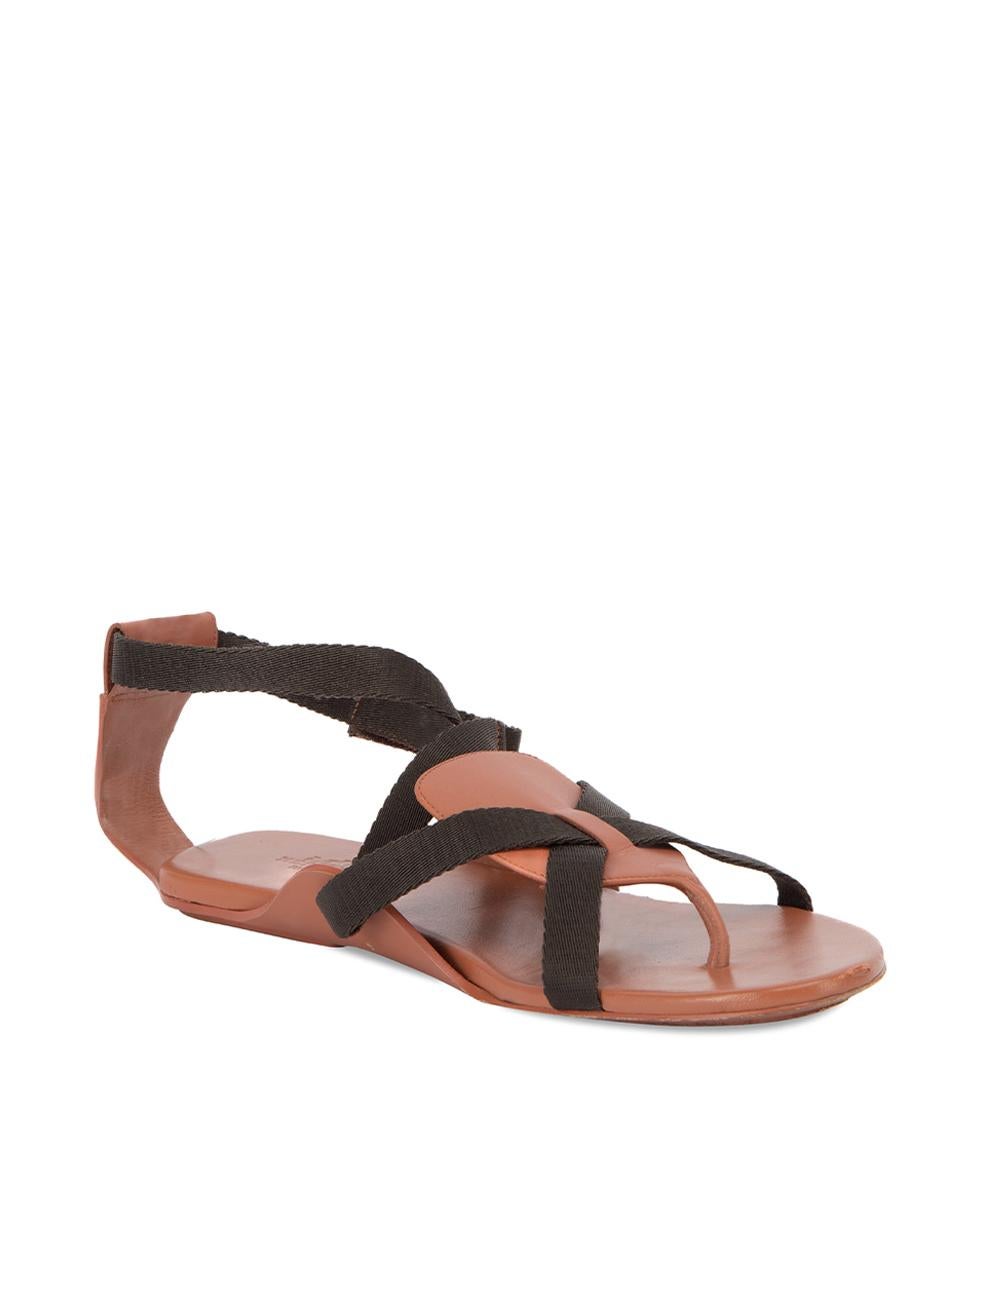 CONDITION is Very good. Minimal wear to sandals is evident. Minimal wear to and scuffs to the leather at the toe point which has started to come off on this used Hermès designer resale item. This item comes with original dustbags.  Details  Brown